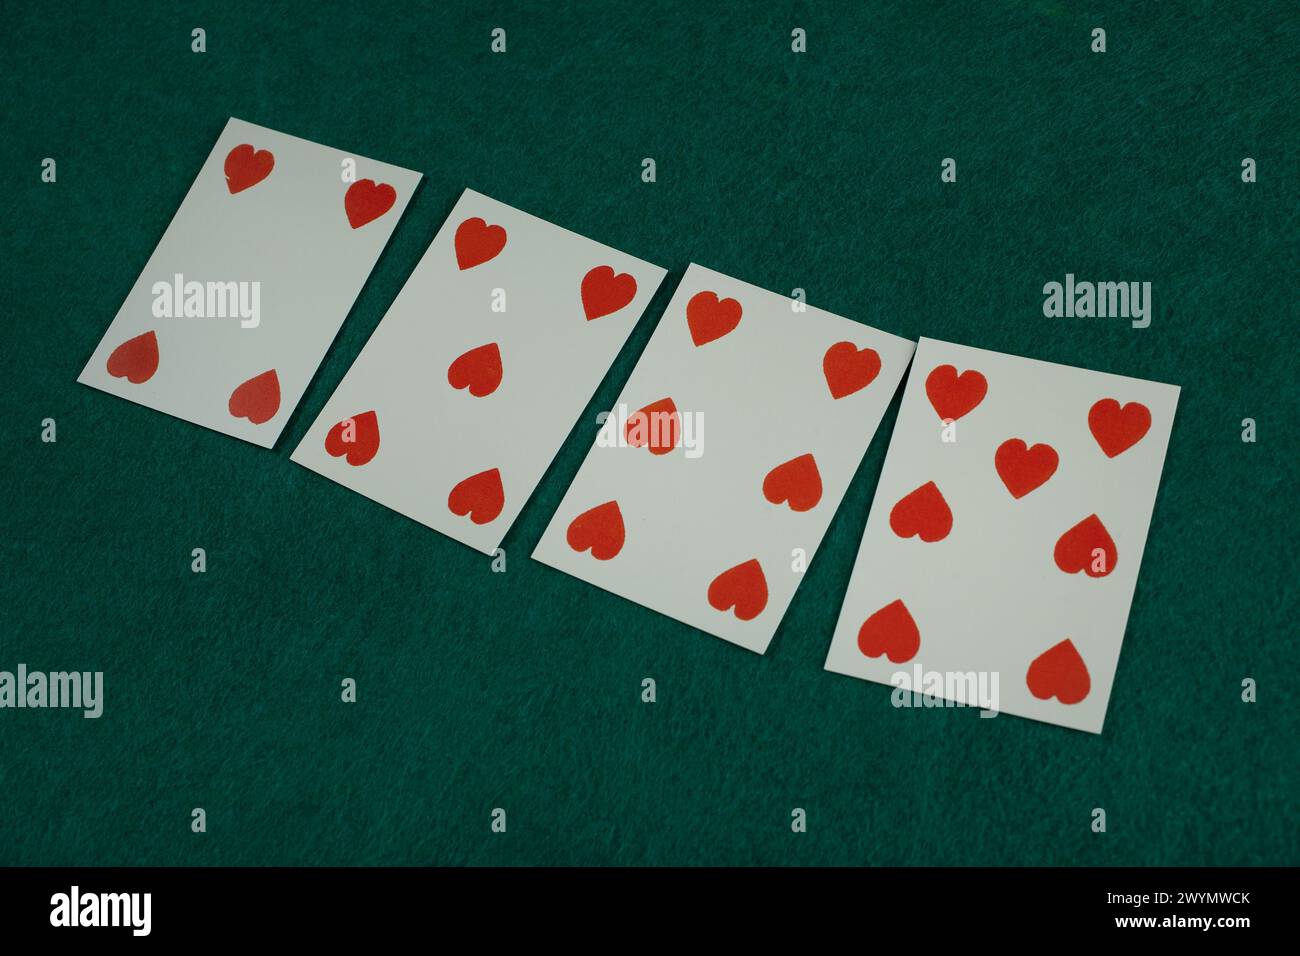 Old west era playing card on on green gambling table. 4, 5, 6, 7 of hearts. Stock Photo